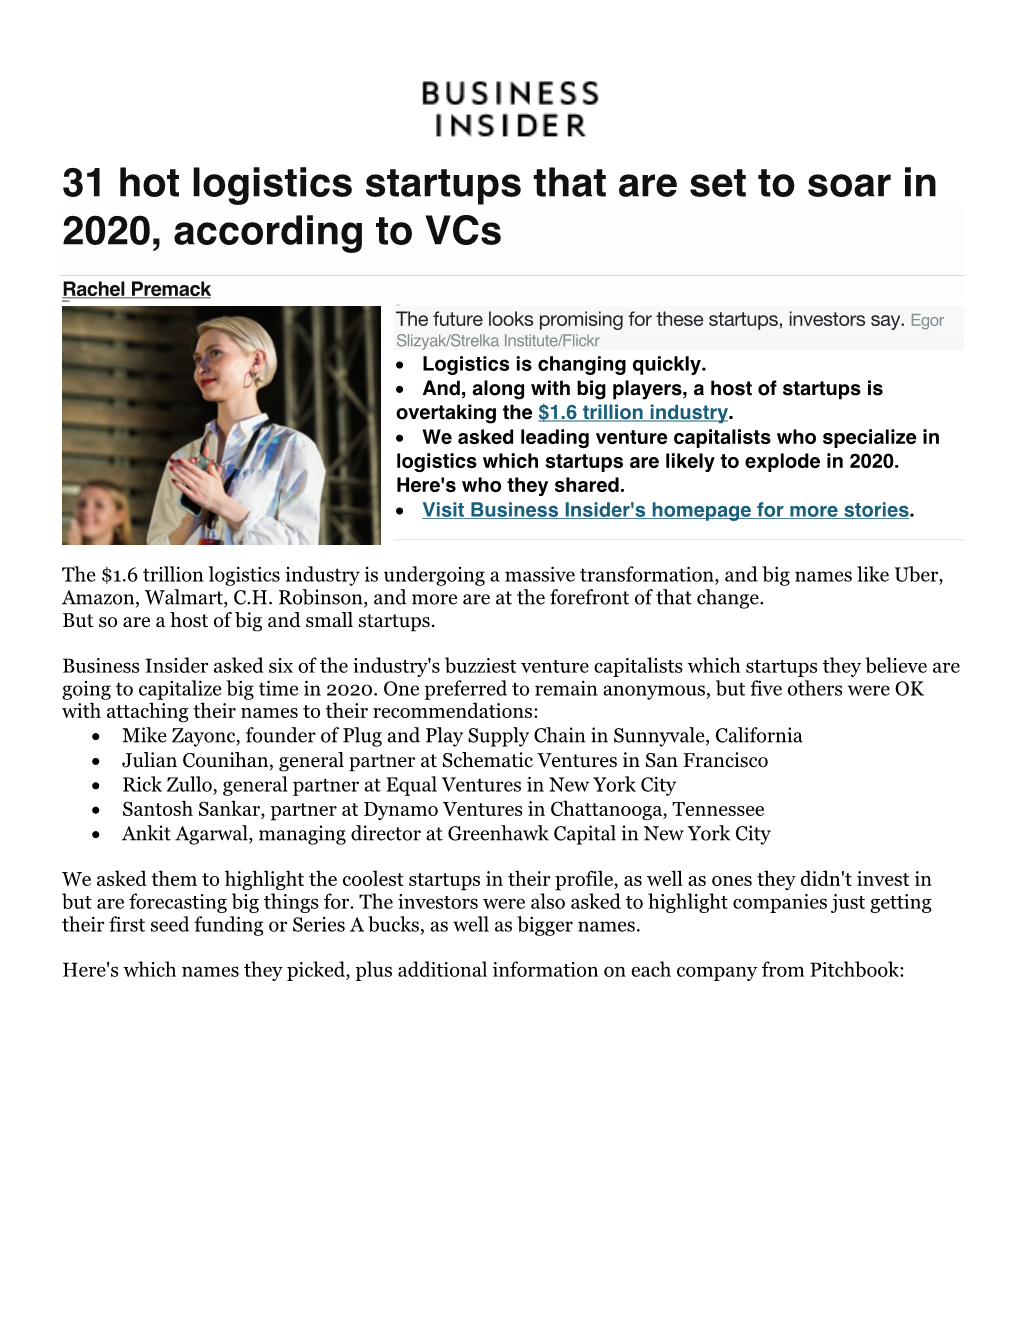 31 Hot Logistics Startups That Are Set to Soar in 2020, According to Vcs